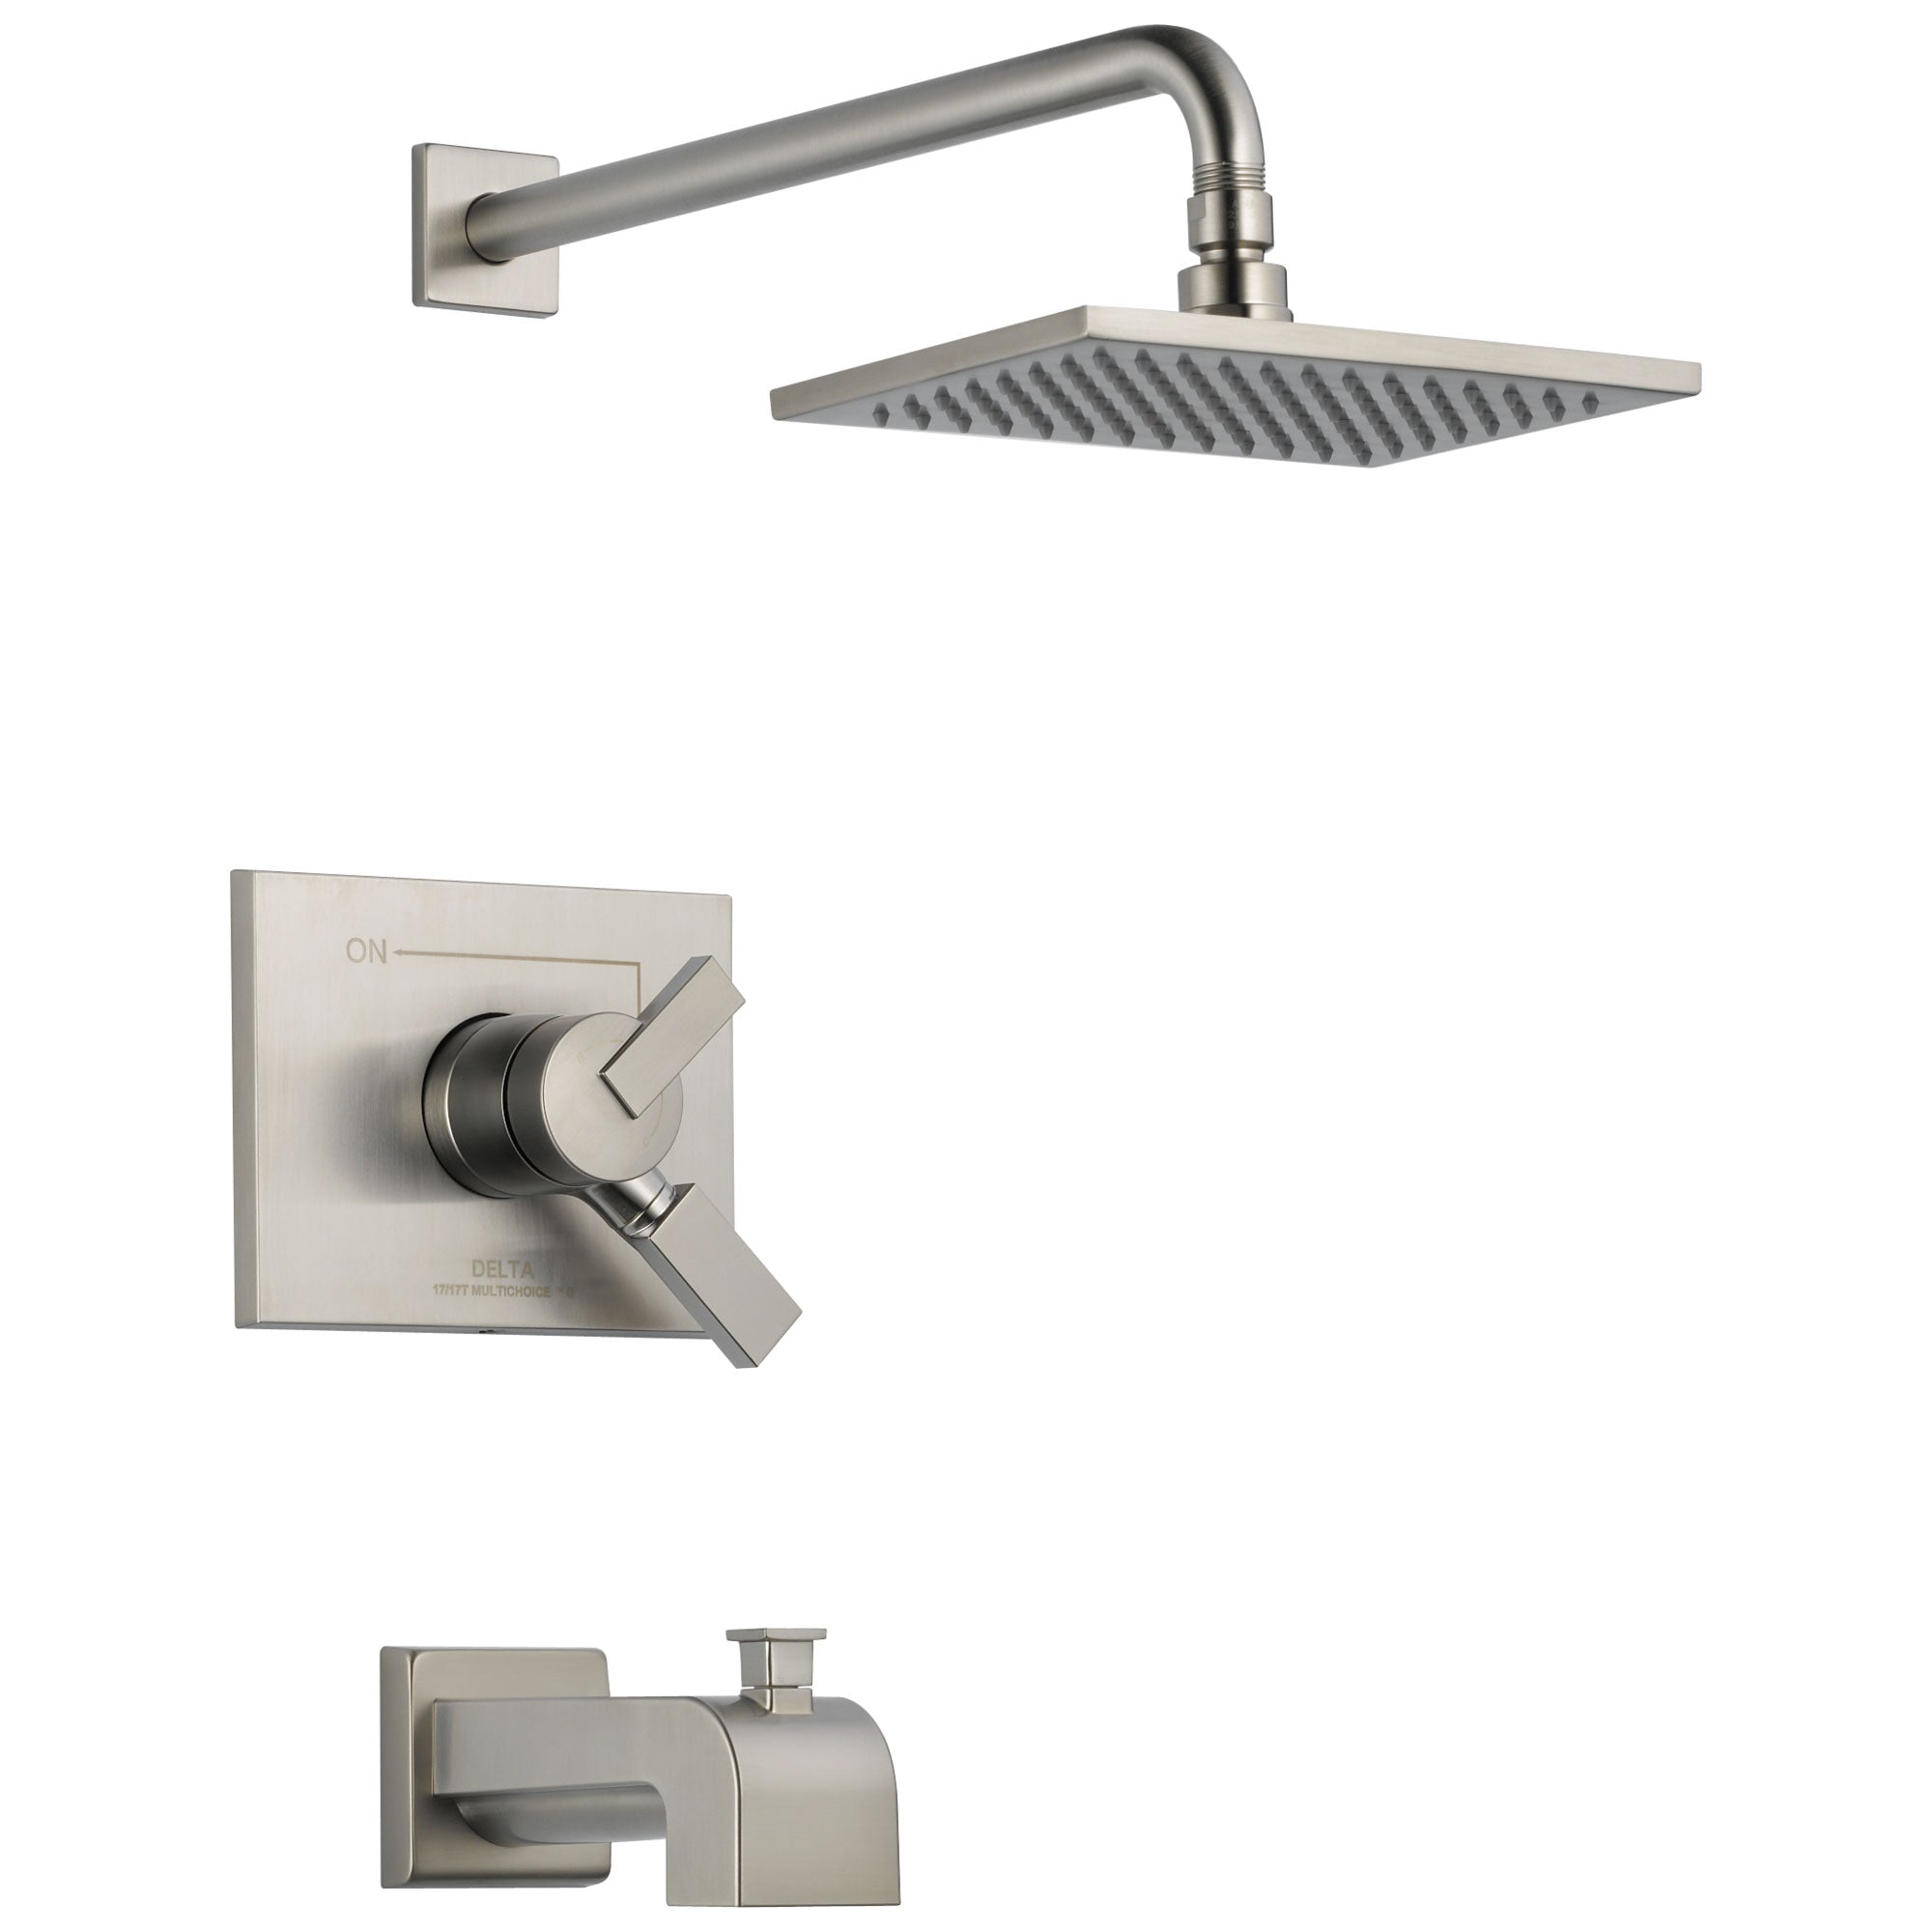 Delta Vero Stainless Steel Finish Monitor 17 Series Water Efficient Tub & Shower Combo Faucet Trim Kit (Requires Valve) DT17453SSWE